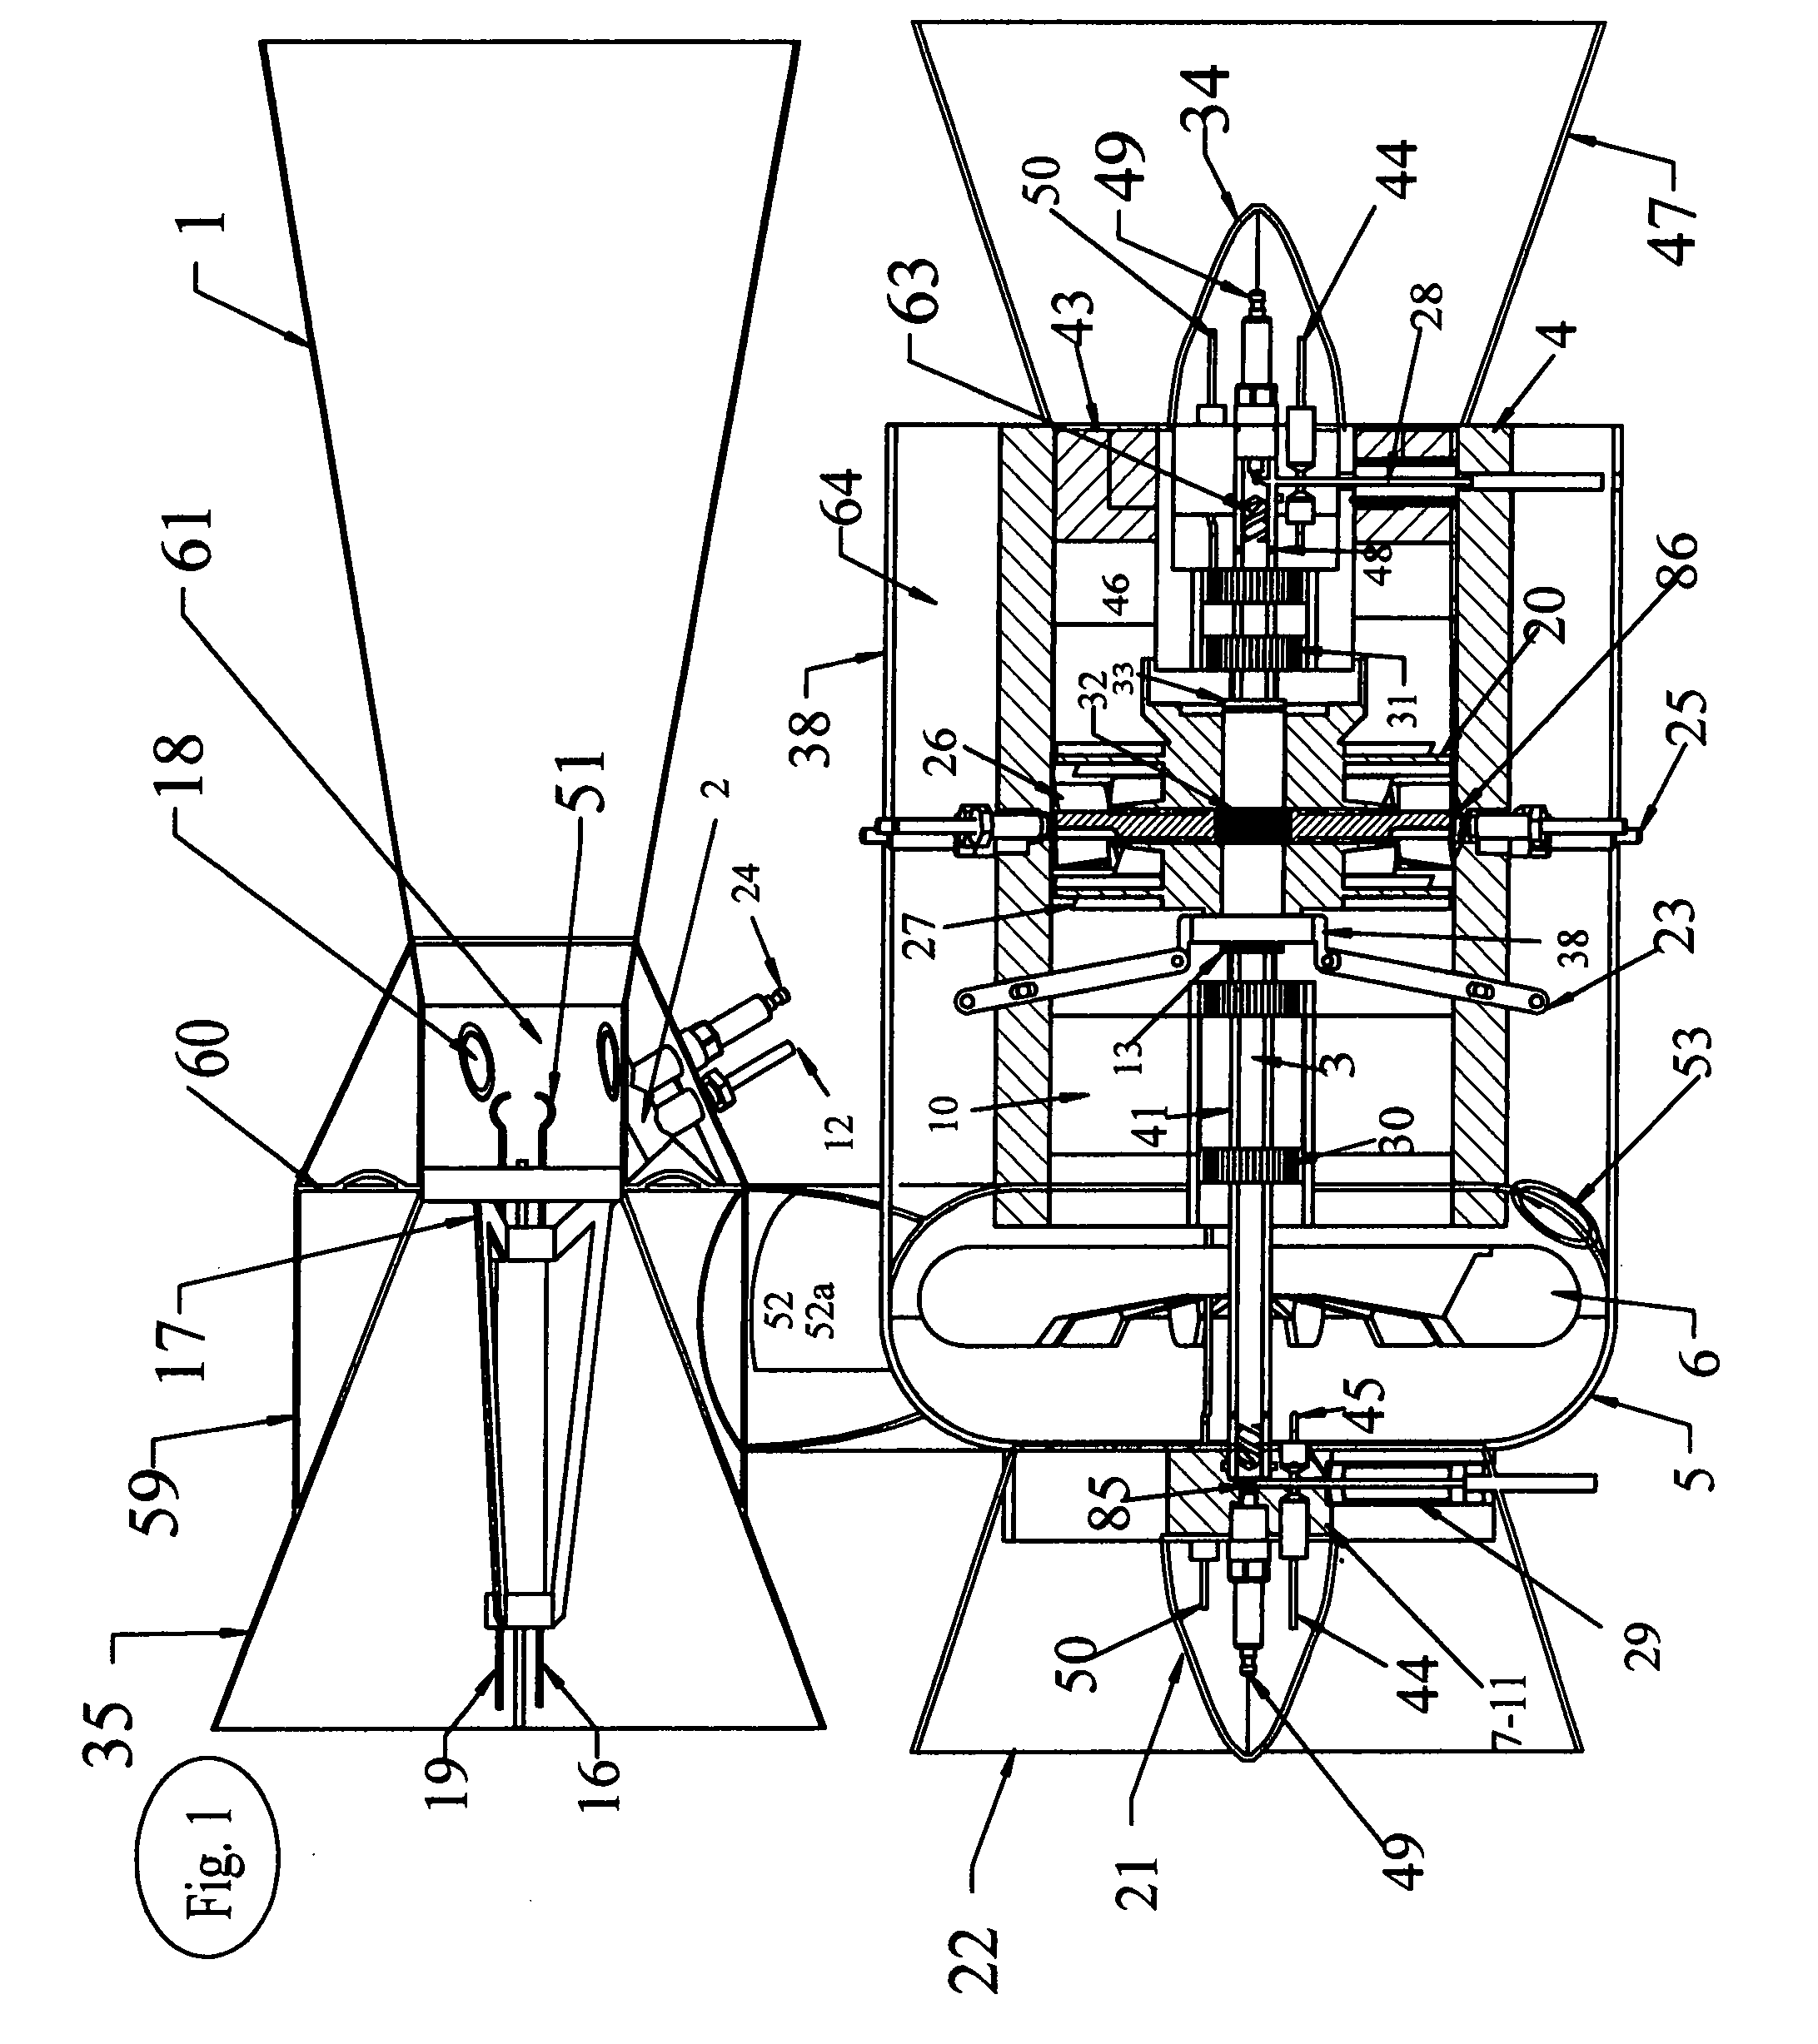 Methods of combining a series of more efficient aircraft engines into a unit, or modular units